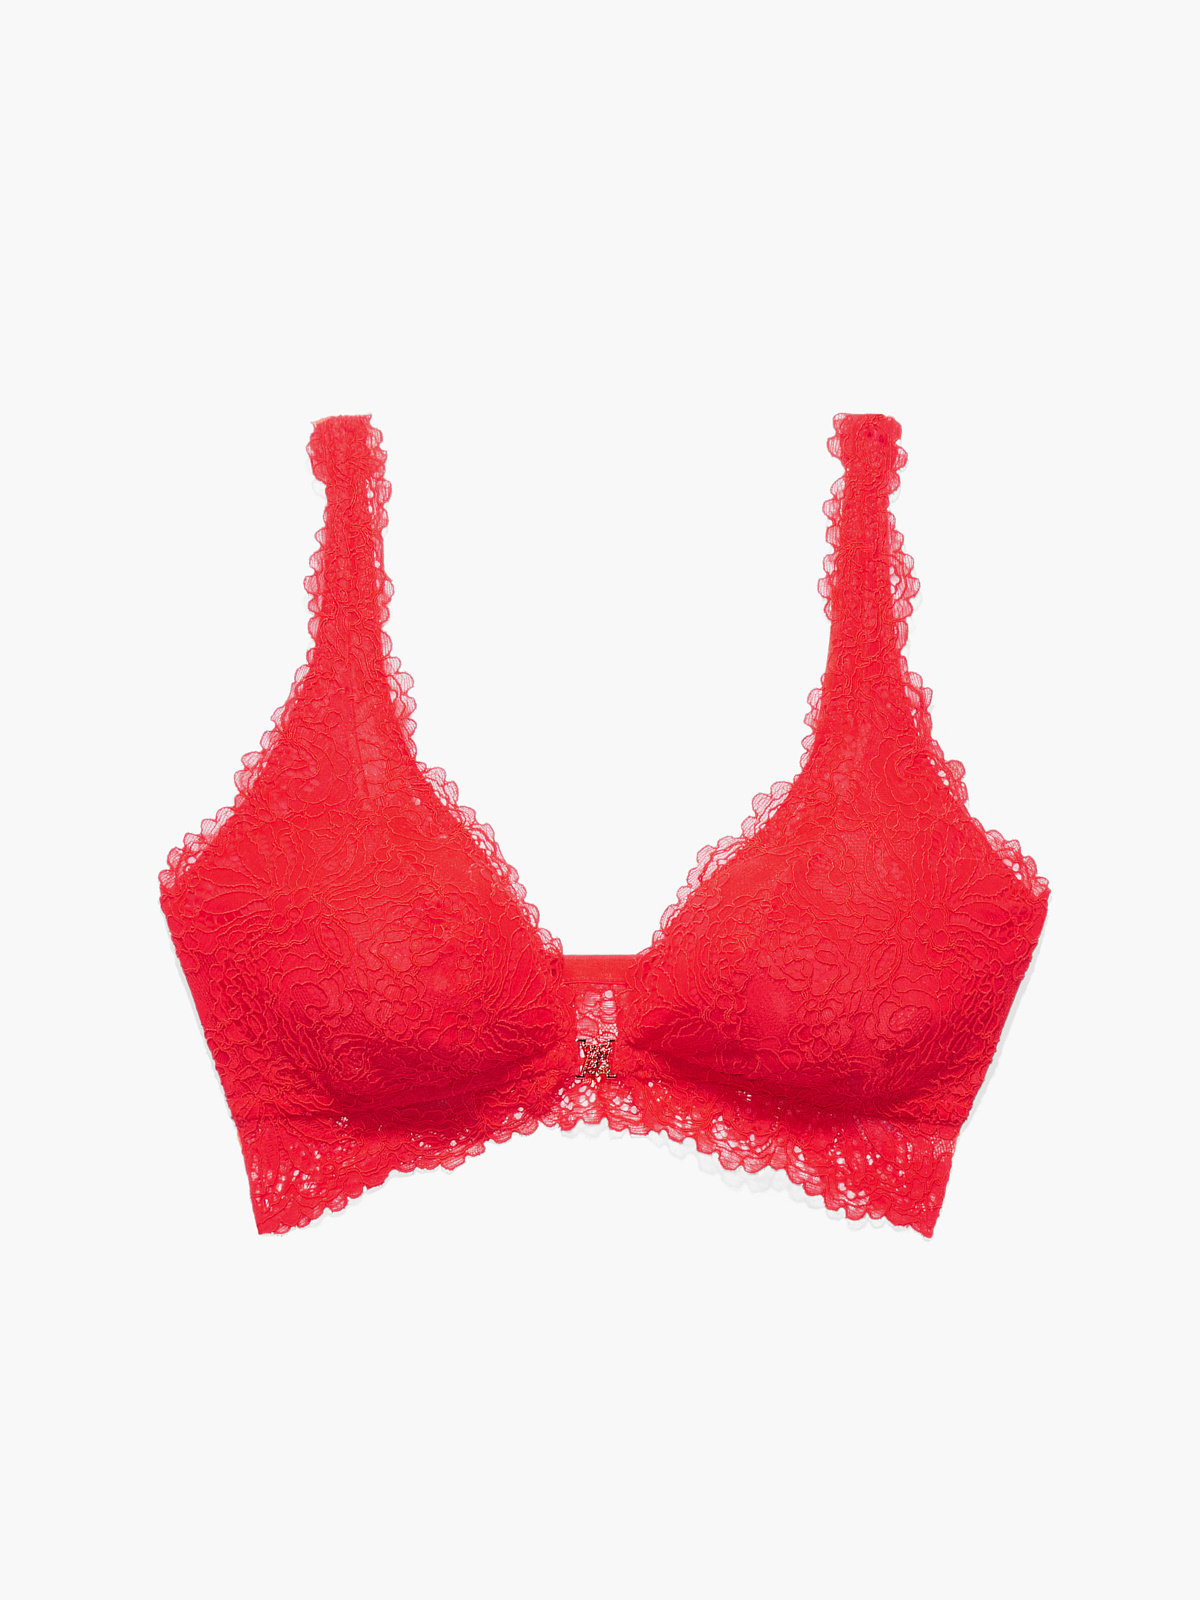 Bralette Lace Red Cacique Collection, Intimates & Sleepwear